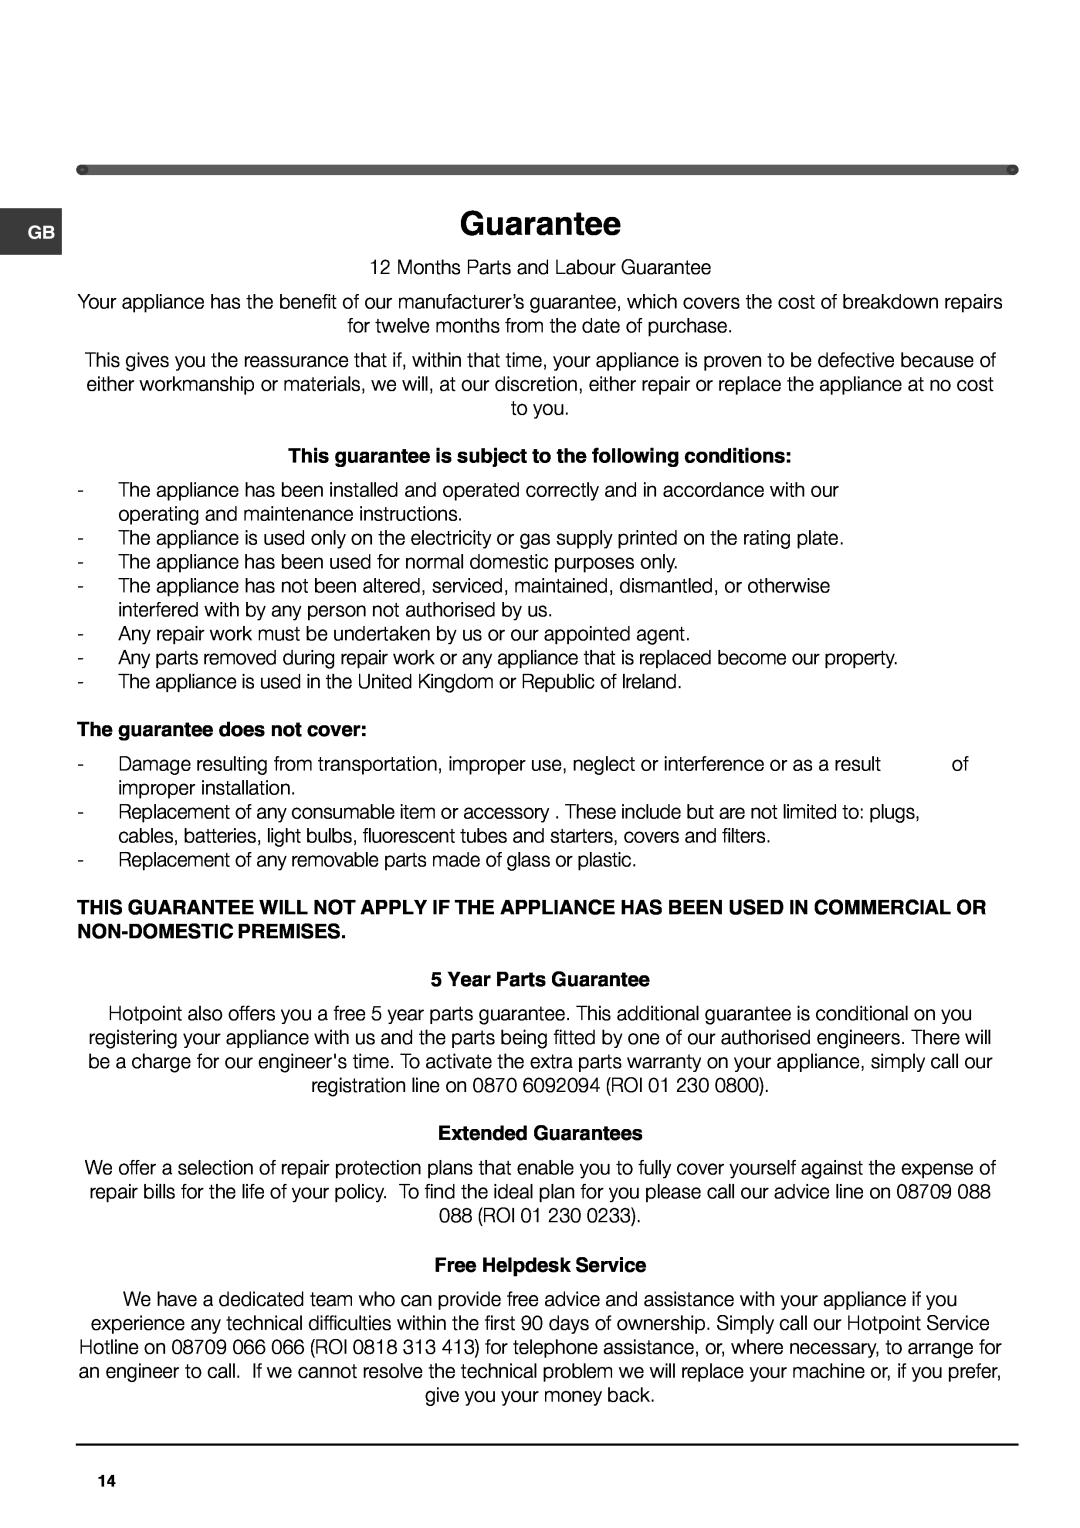 Hotpoint FFQ50P manual Guarantee, This guarantee is subject to the following conditions, The guarantee does not cover 